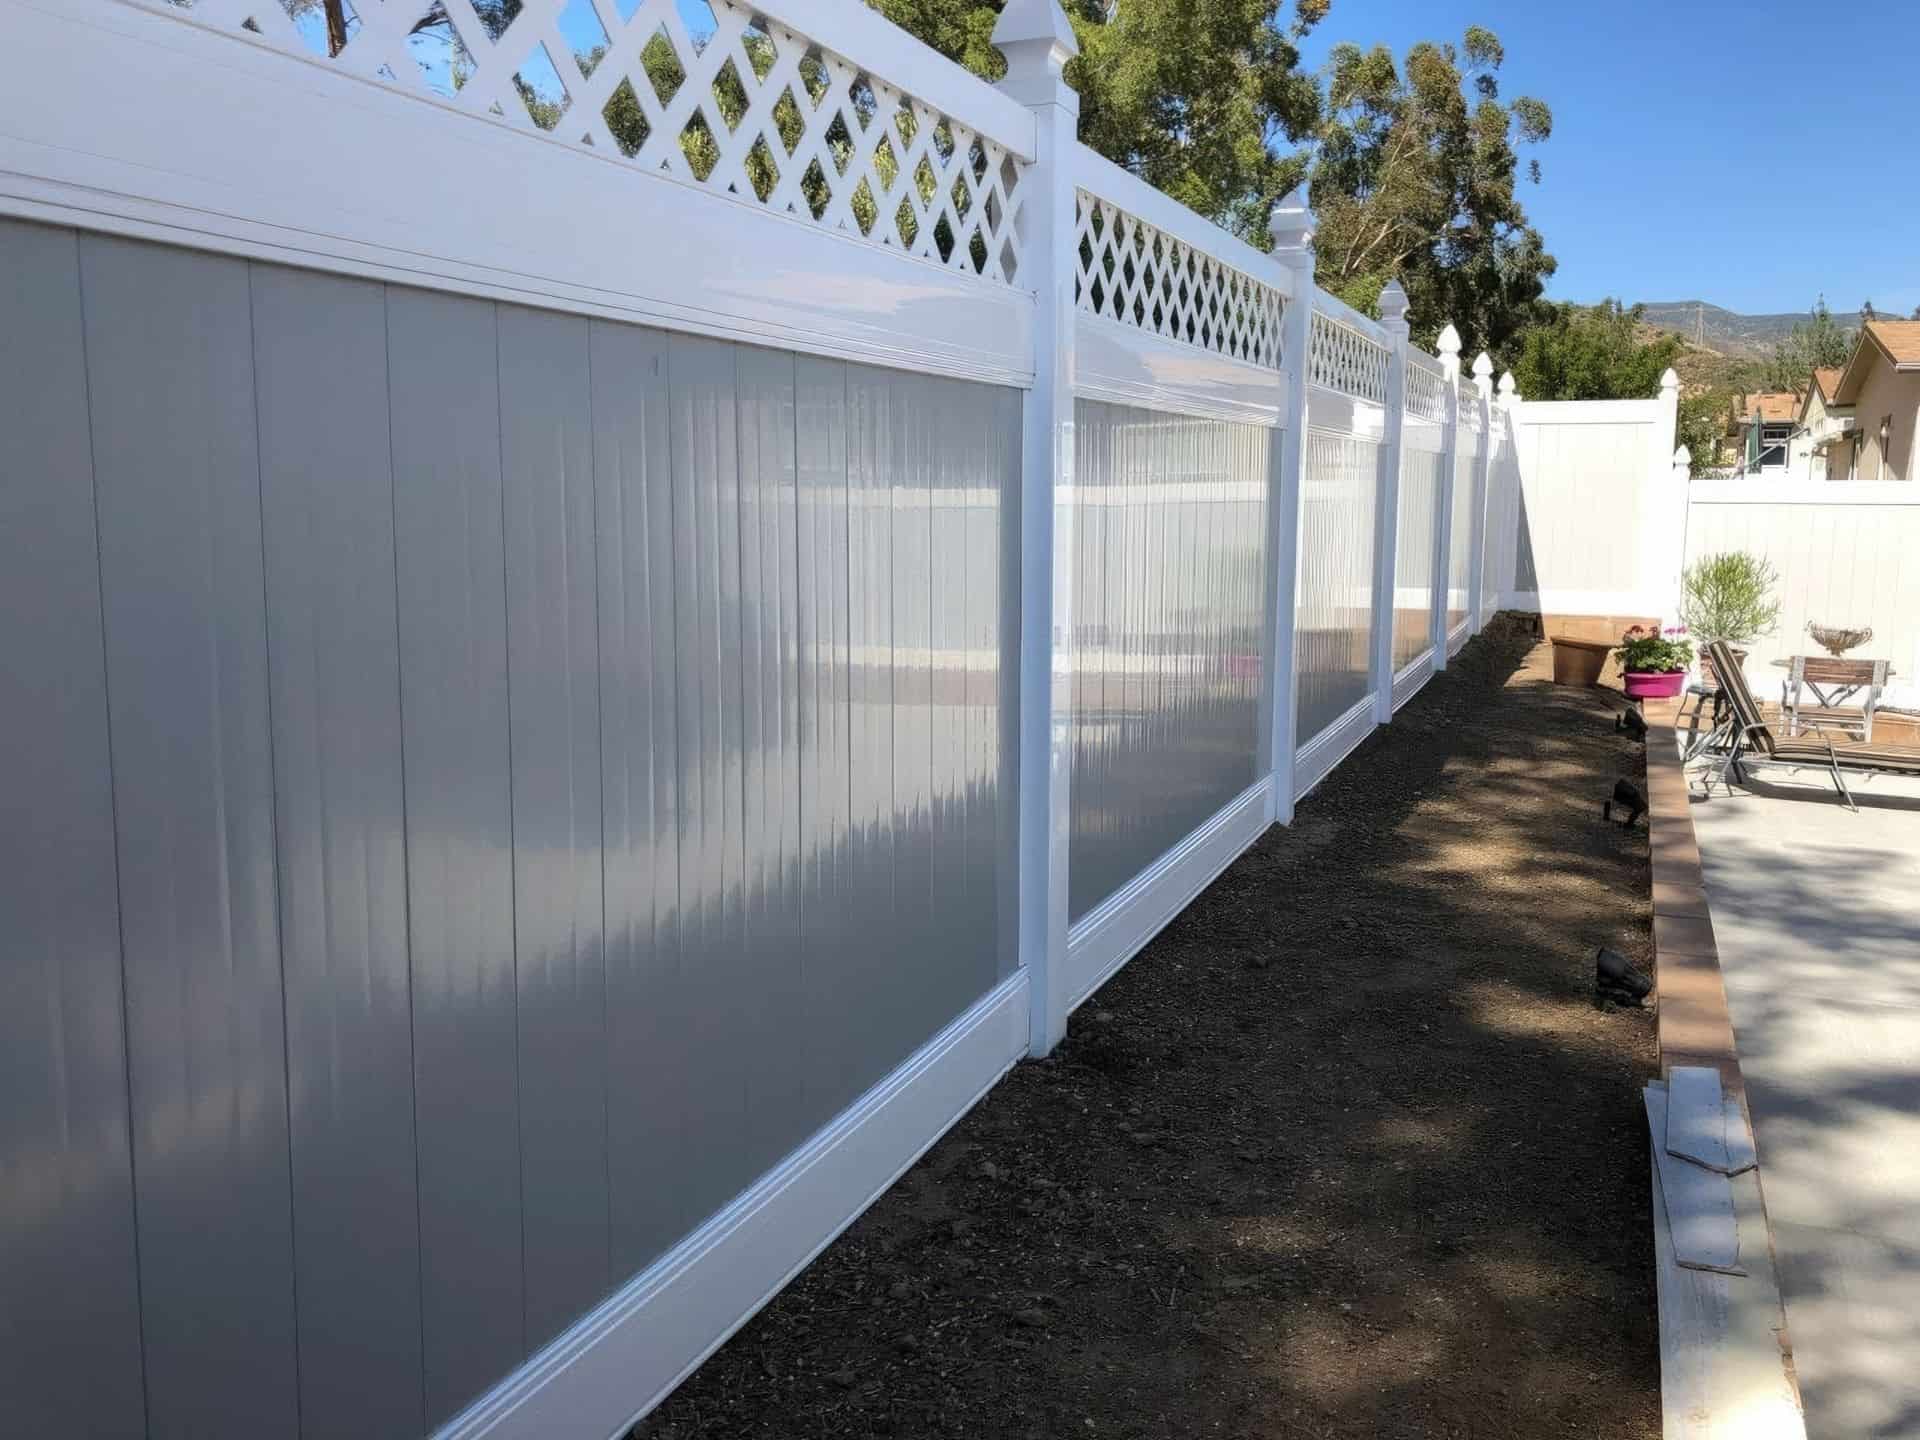 Vinyl privacy two-tone fence with gray center and white border surrounding backyard retreat with small garden and chairs.